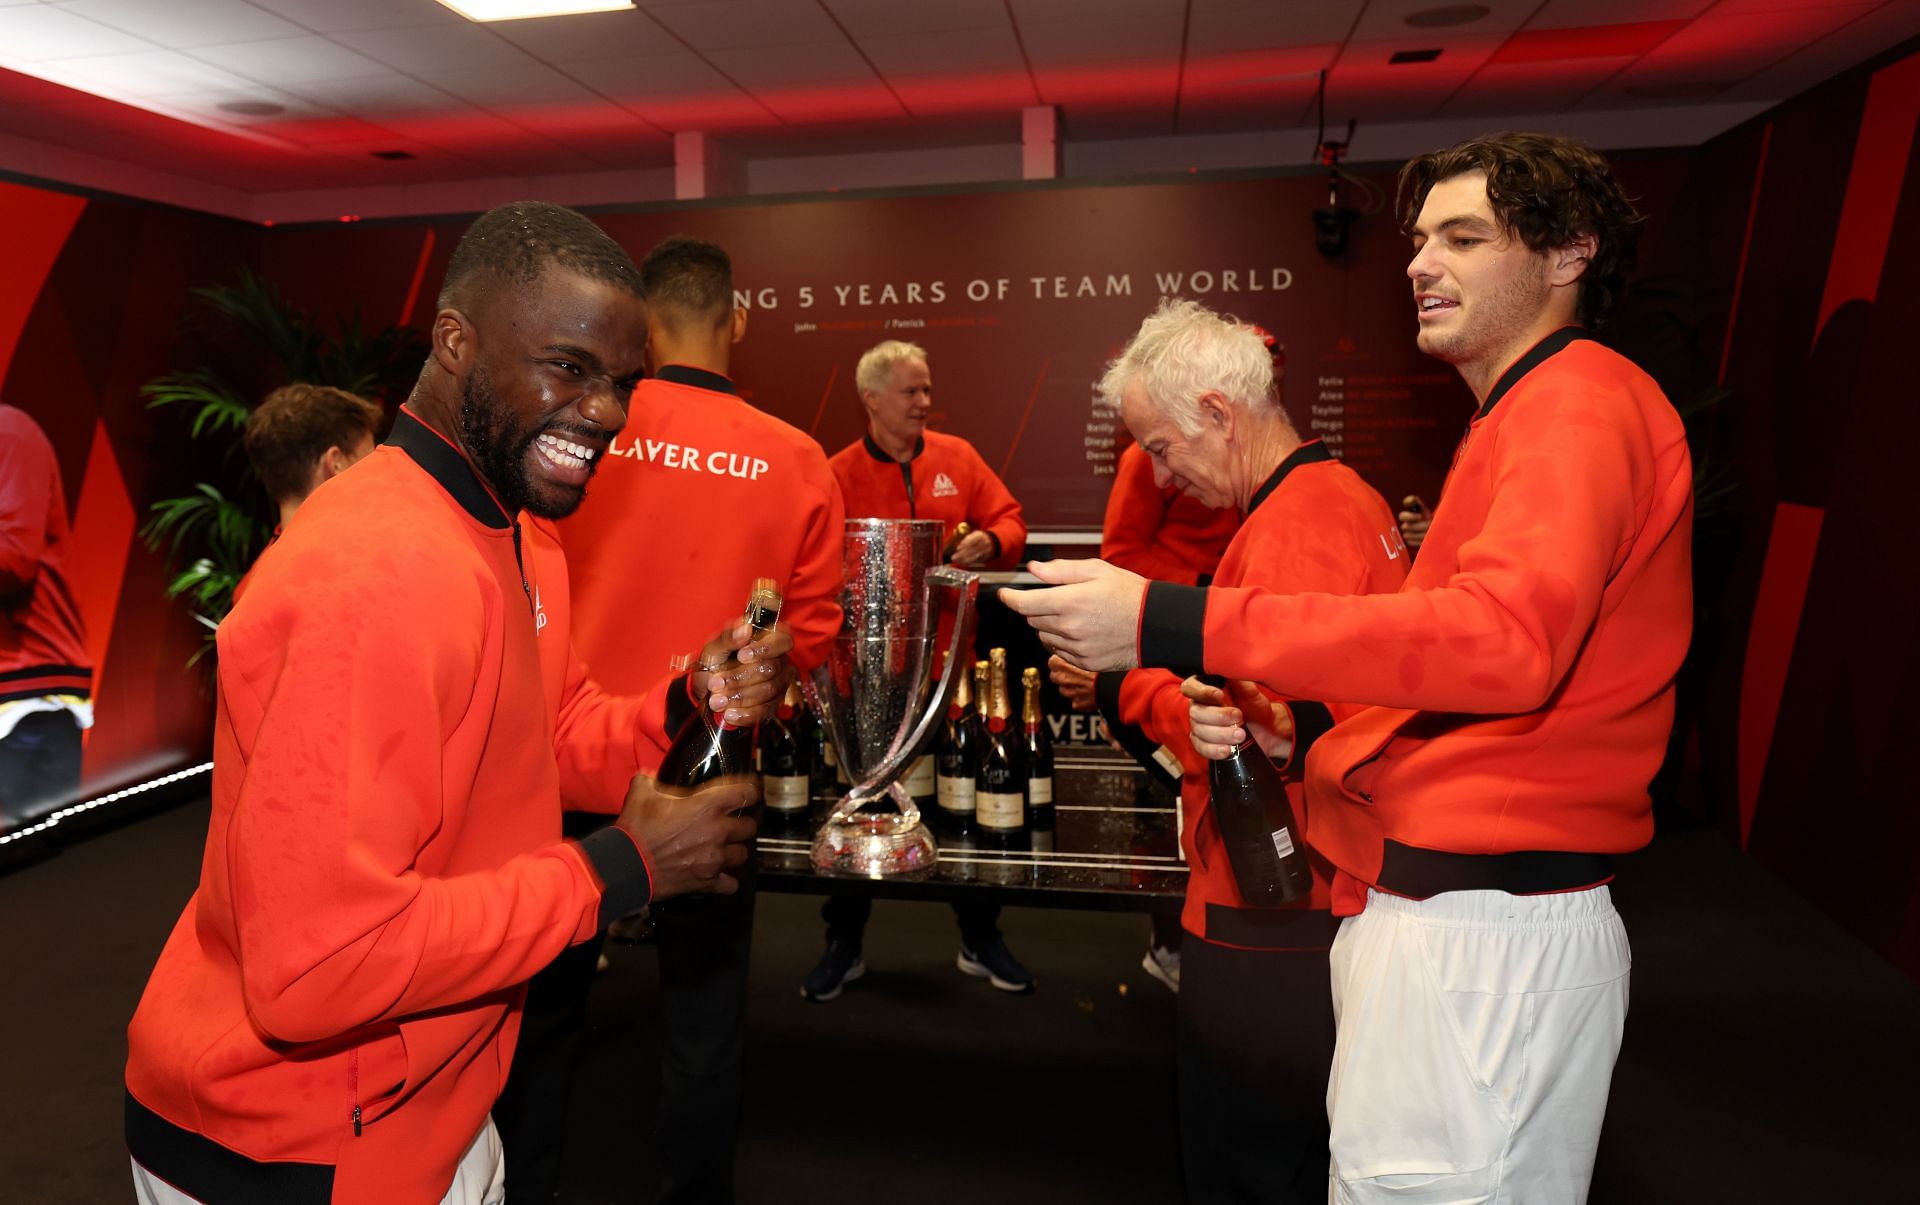 Frances Tiafoe and Taylor Fritz of Team World celebrate their victory at the 2022 Laver Cup 